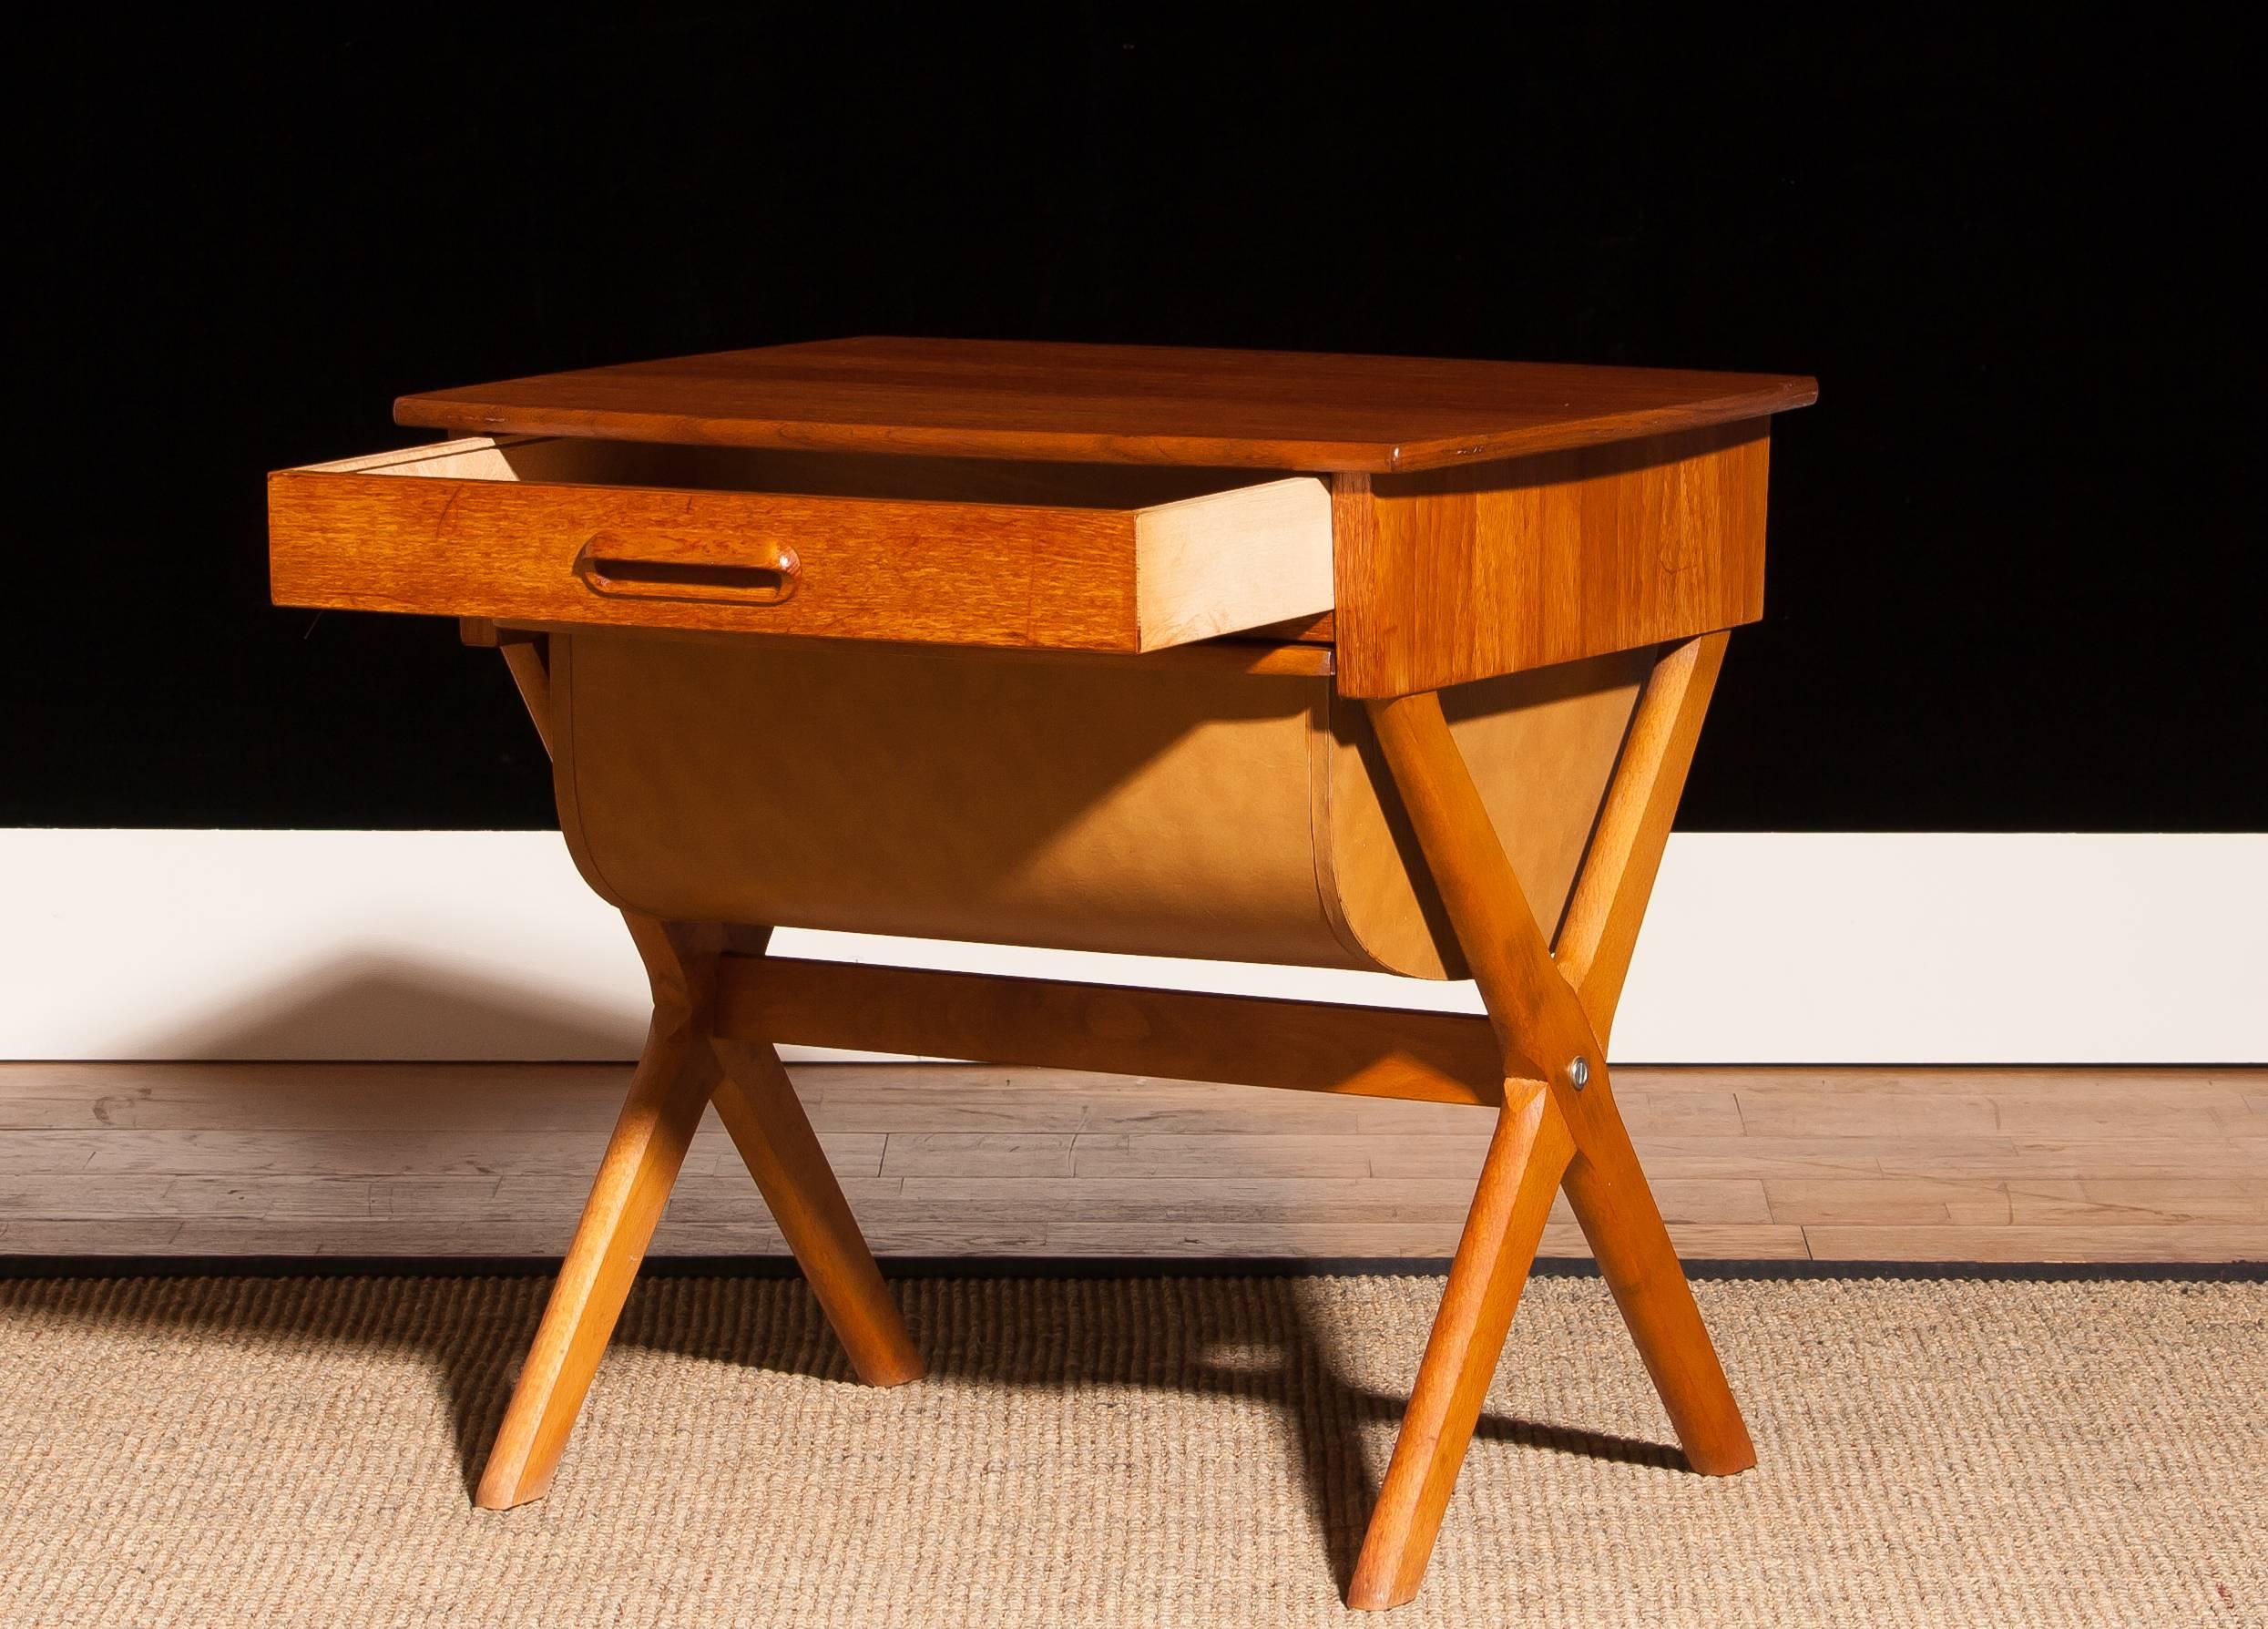 Very nice sewing table made in Sweden.
This table is made of teak and has one normal drawer and one deep drawer.
It is in a beautiful condition.
Period 1960s
Dimensions H 52 cm, W 52 cm , D 45 cm.